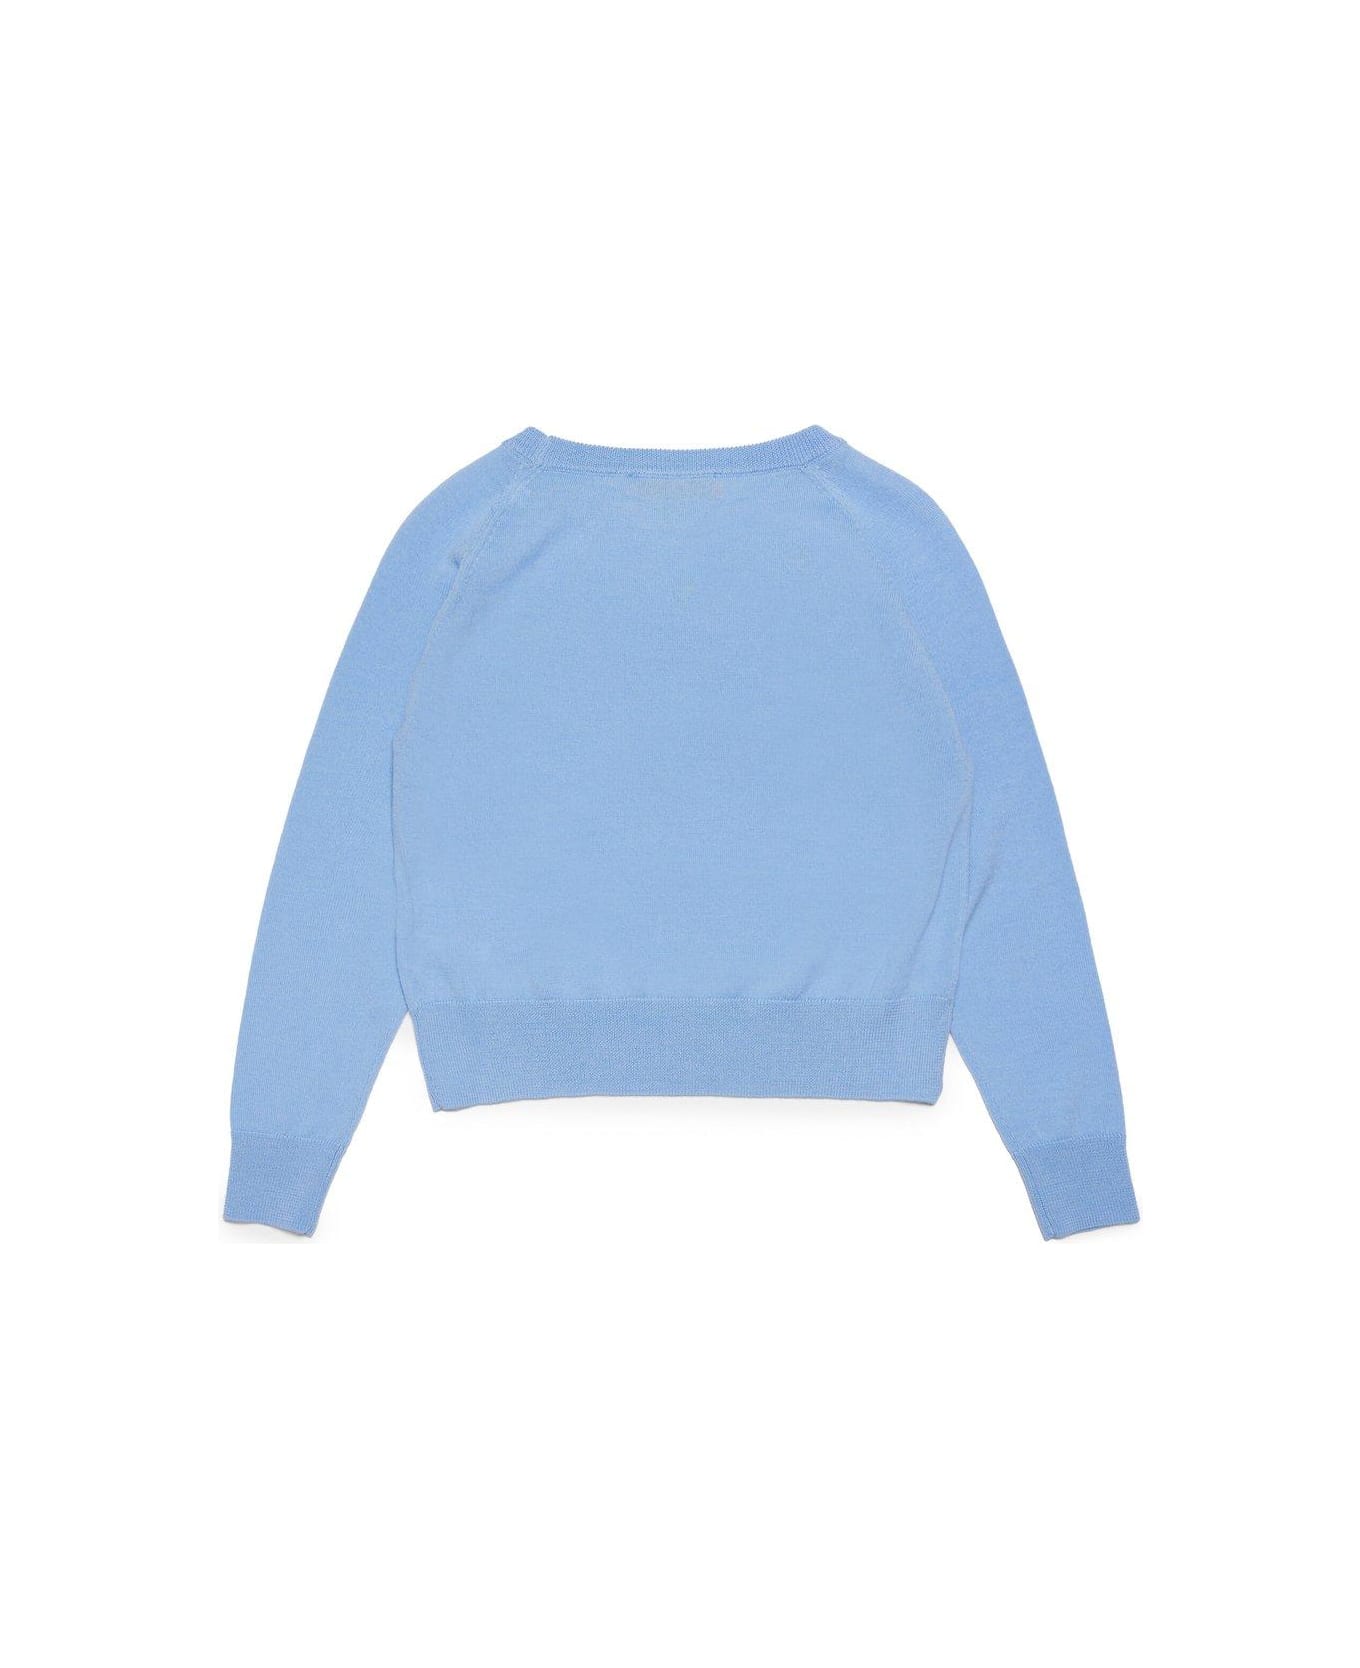 Max&Co. Heart Embroidered Knitted Jumper - Blue